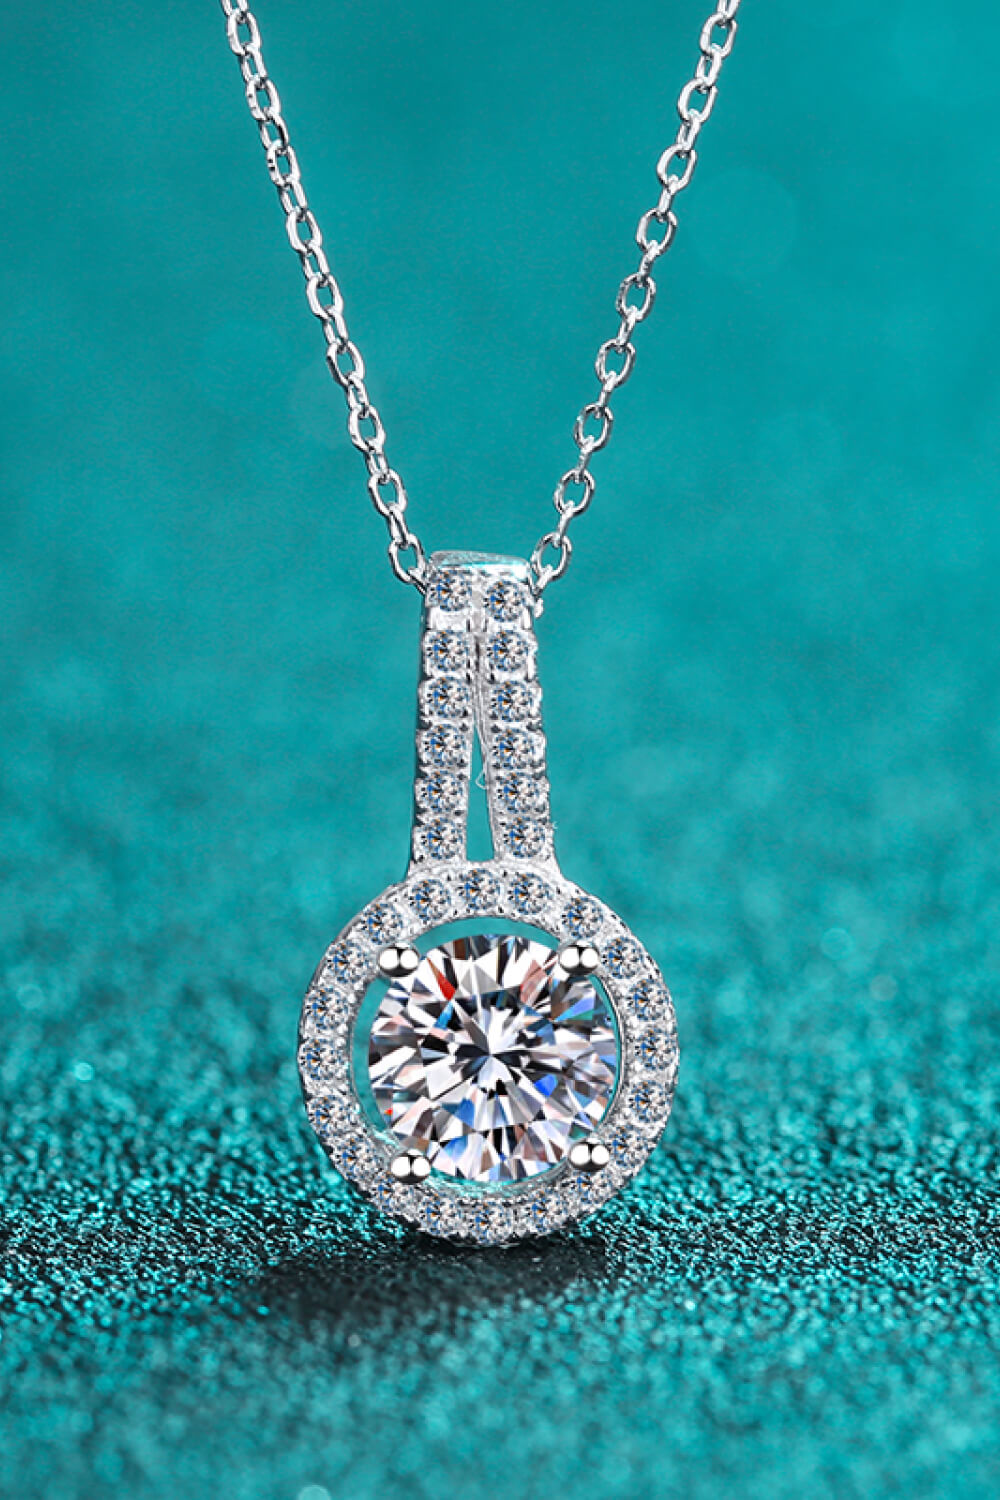 Build You Up Moissanite Round Pendant Chain Necklace - Necklaces - FITGGINS